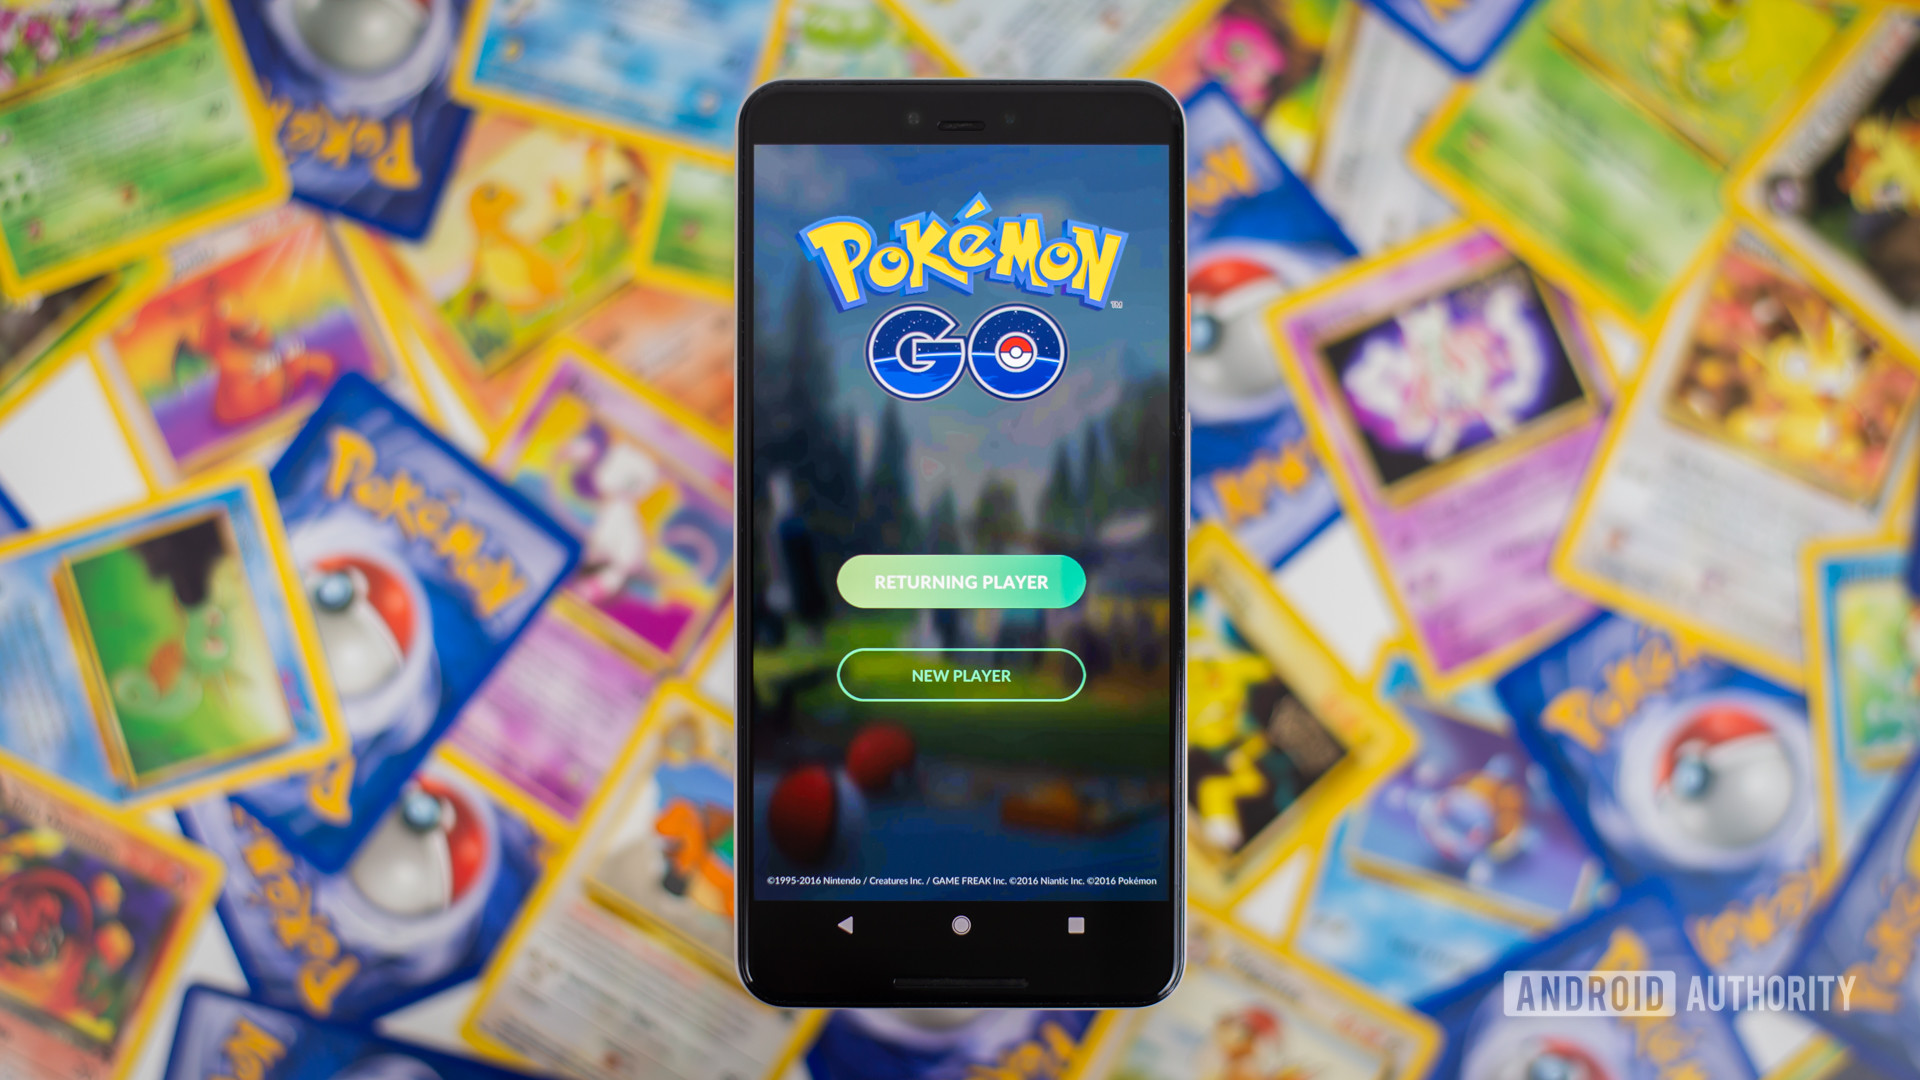 Free Bitcoins In Pokemon Go! Niantic Partners With Fold For A New Bitcoin-Hunting AR Game